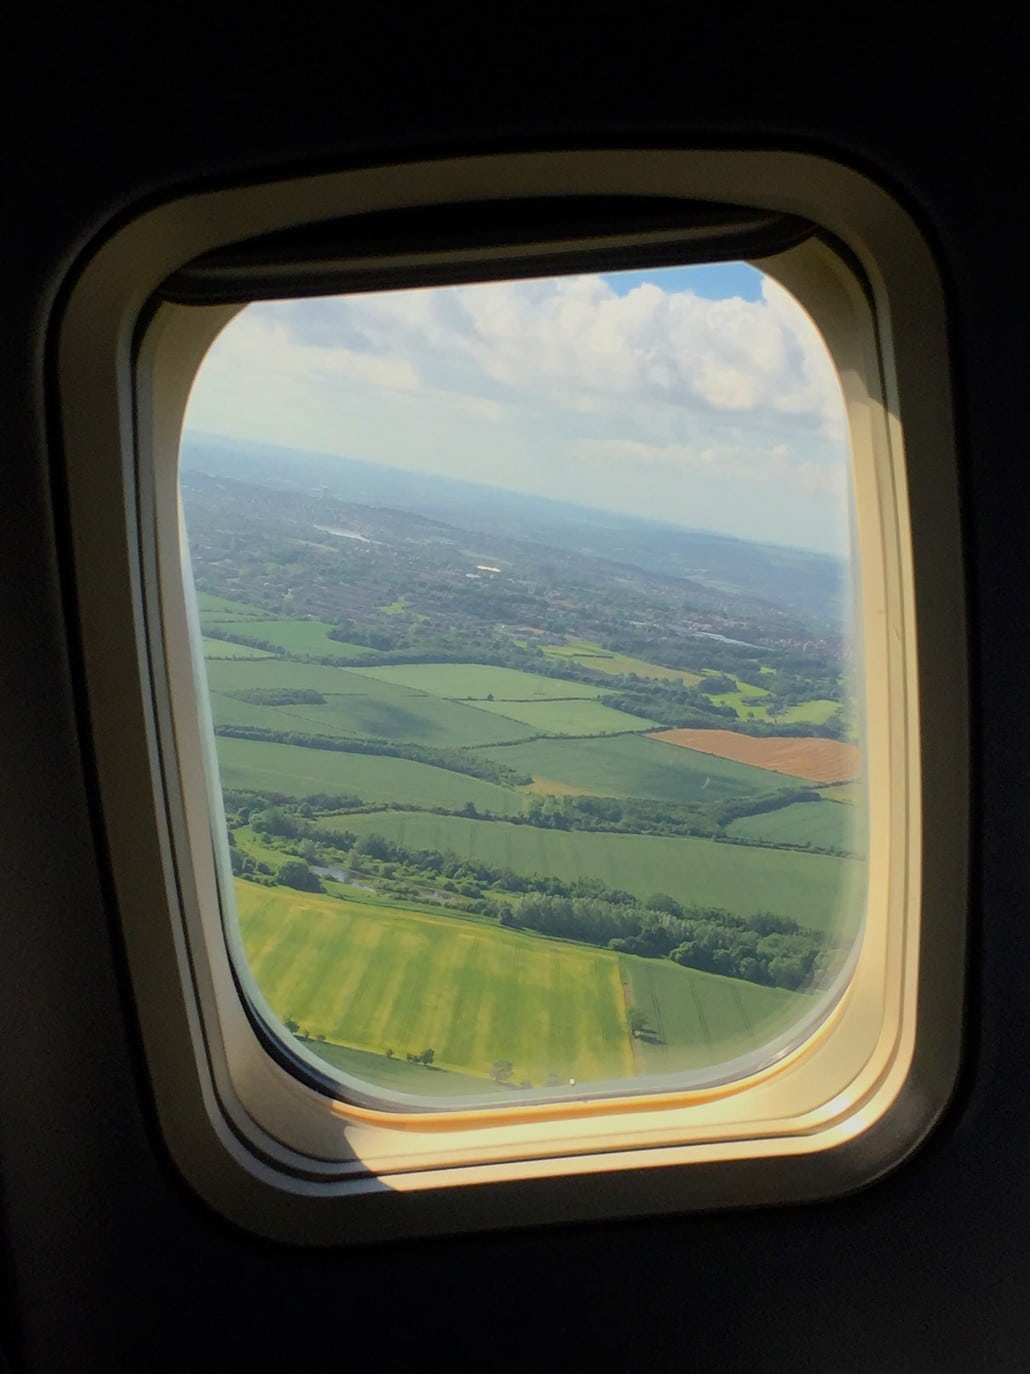 View arriving into Newcastle